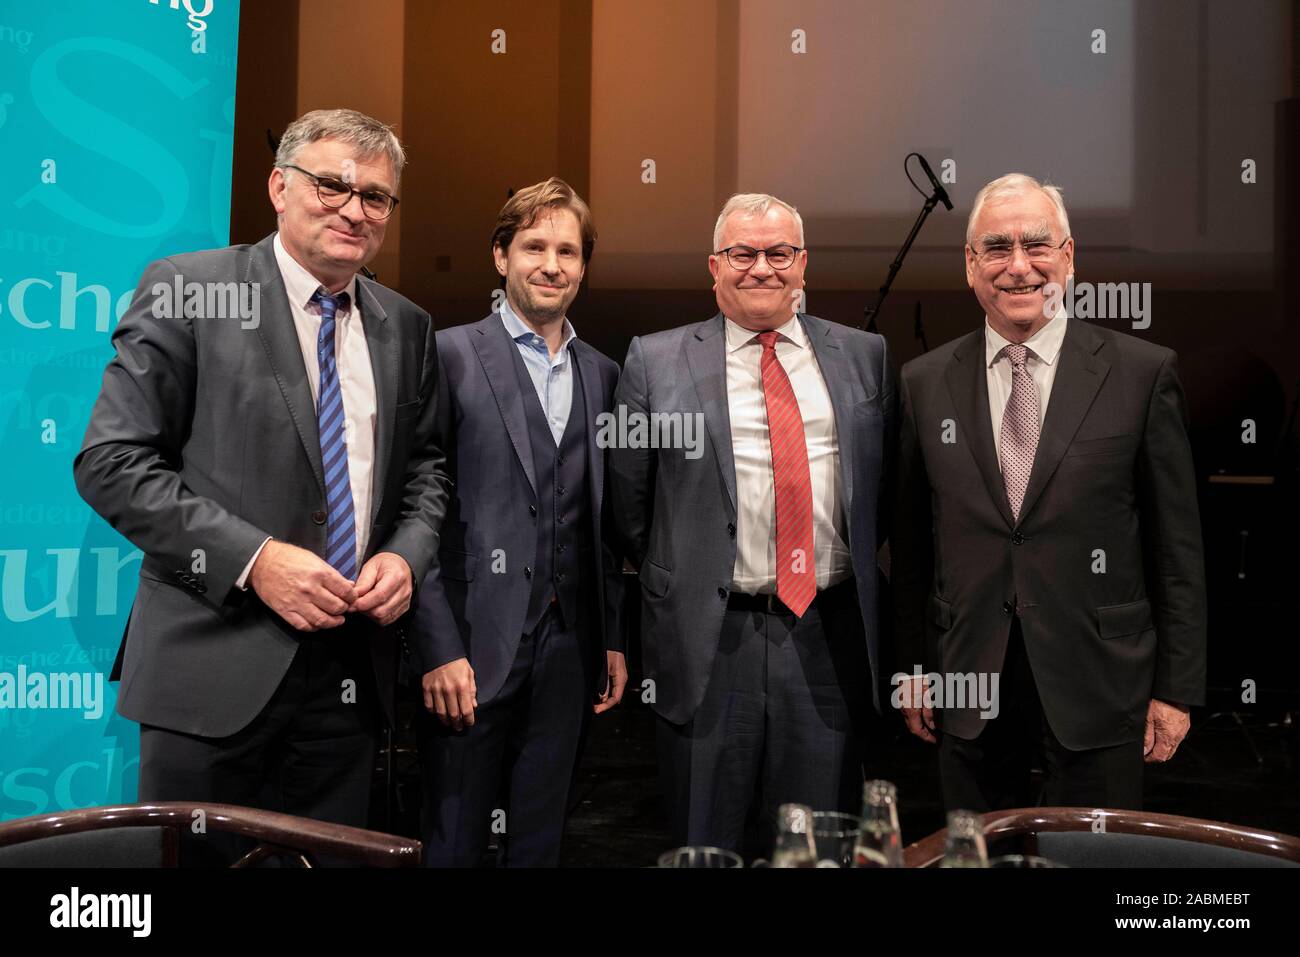 At the beginning of the series 'Wärme und Wallung' of the 'Süddeutsche Zeitung' and the Munich Chamber Orchestra, Clemens Schuldt, Stefan Kornelius and Theo Waigel discuss Germany 30 years after reunification in the Munich Prinzregententheater: Stefan Kornelius (left), Clemens Schuldt, Kurt Kister and Theo Waigel. [automated translation] Stock Photo